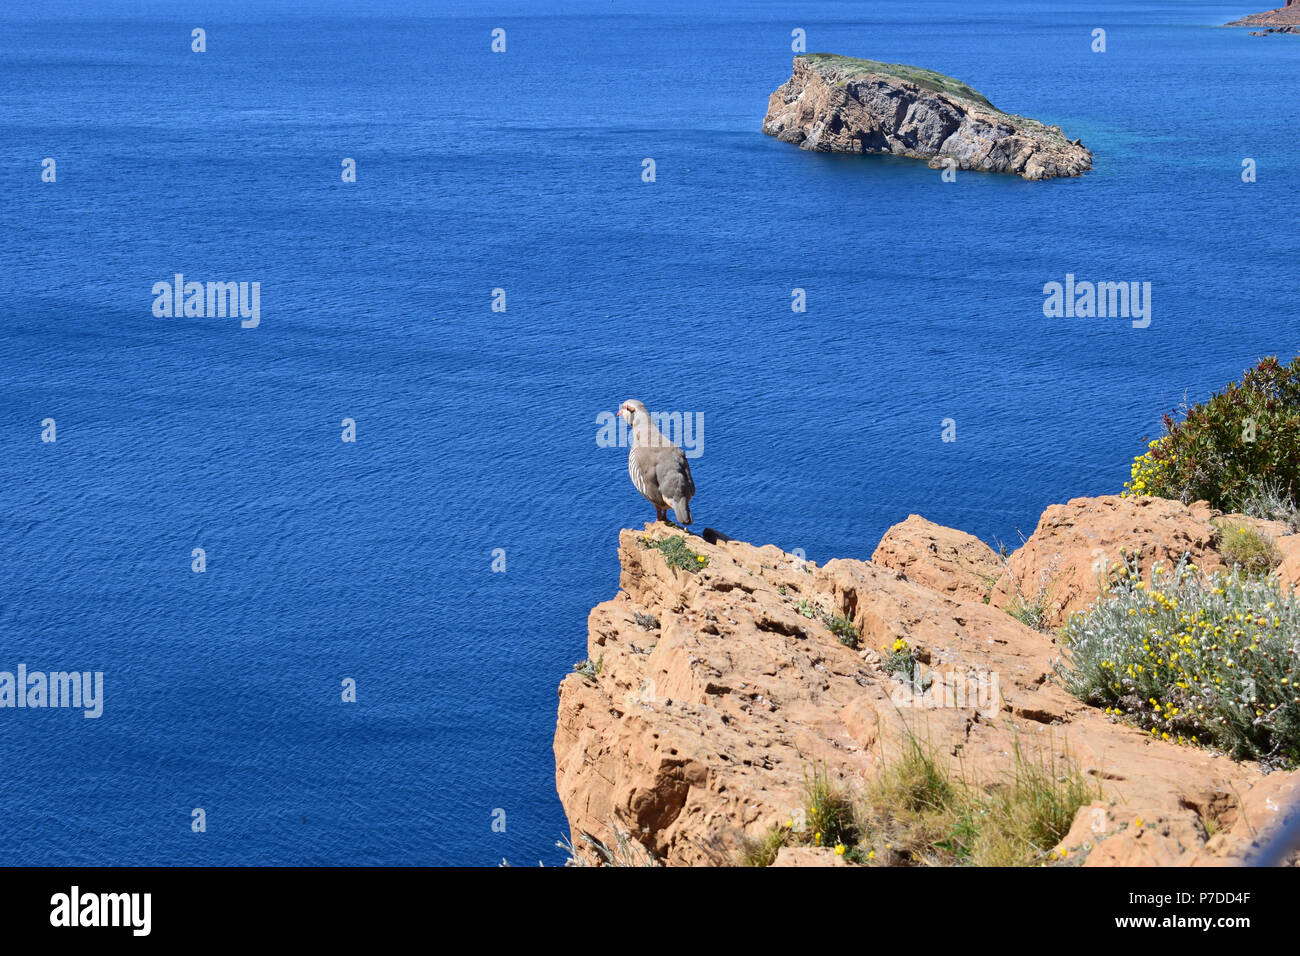 Rock partridge (Alectoris graeca) bird standing at the end of a cliff with sea background Stock Photo